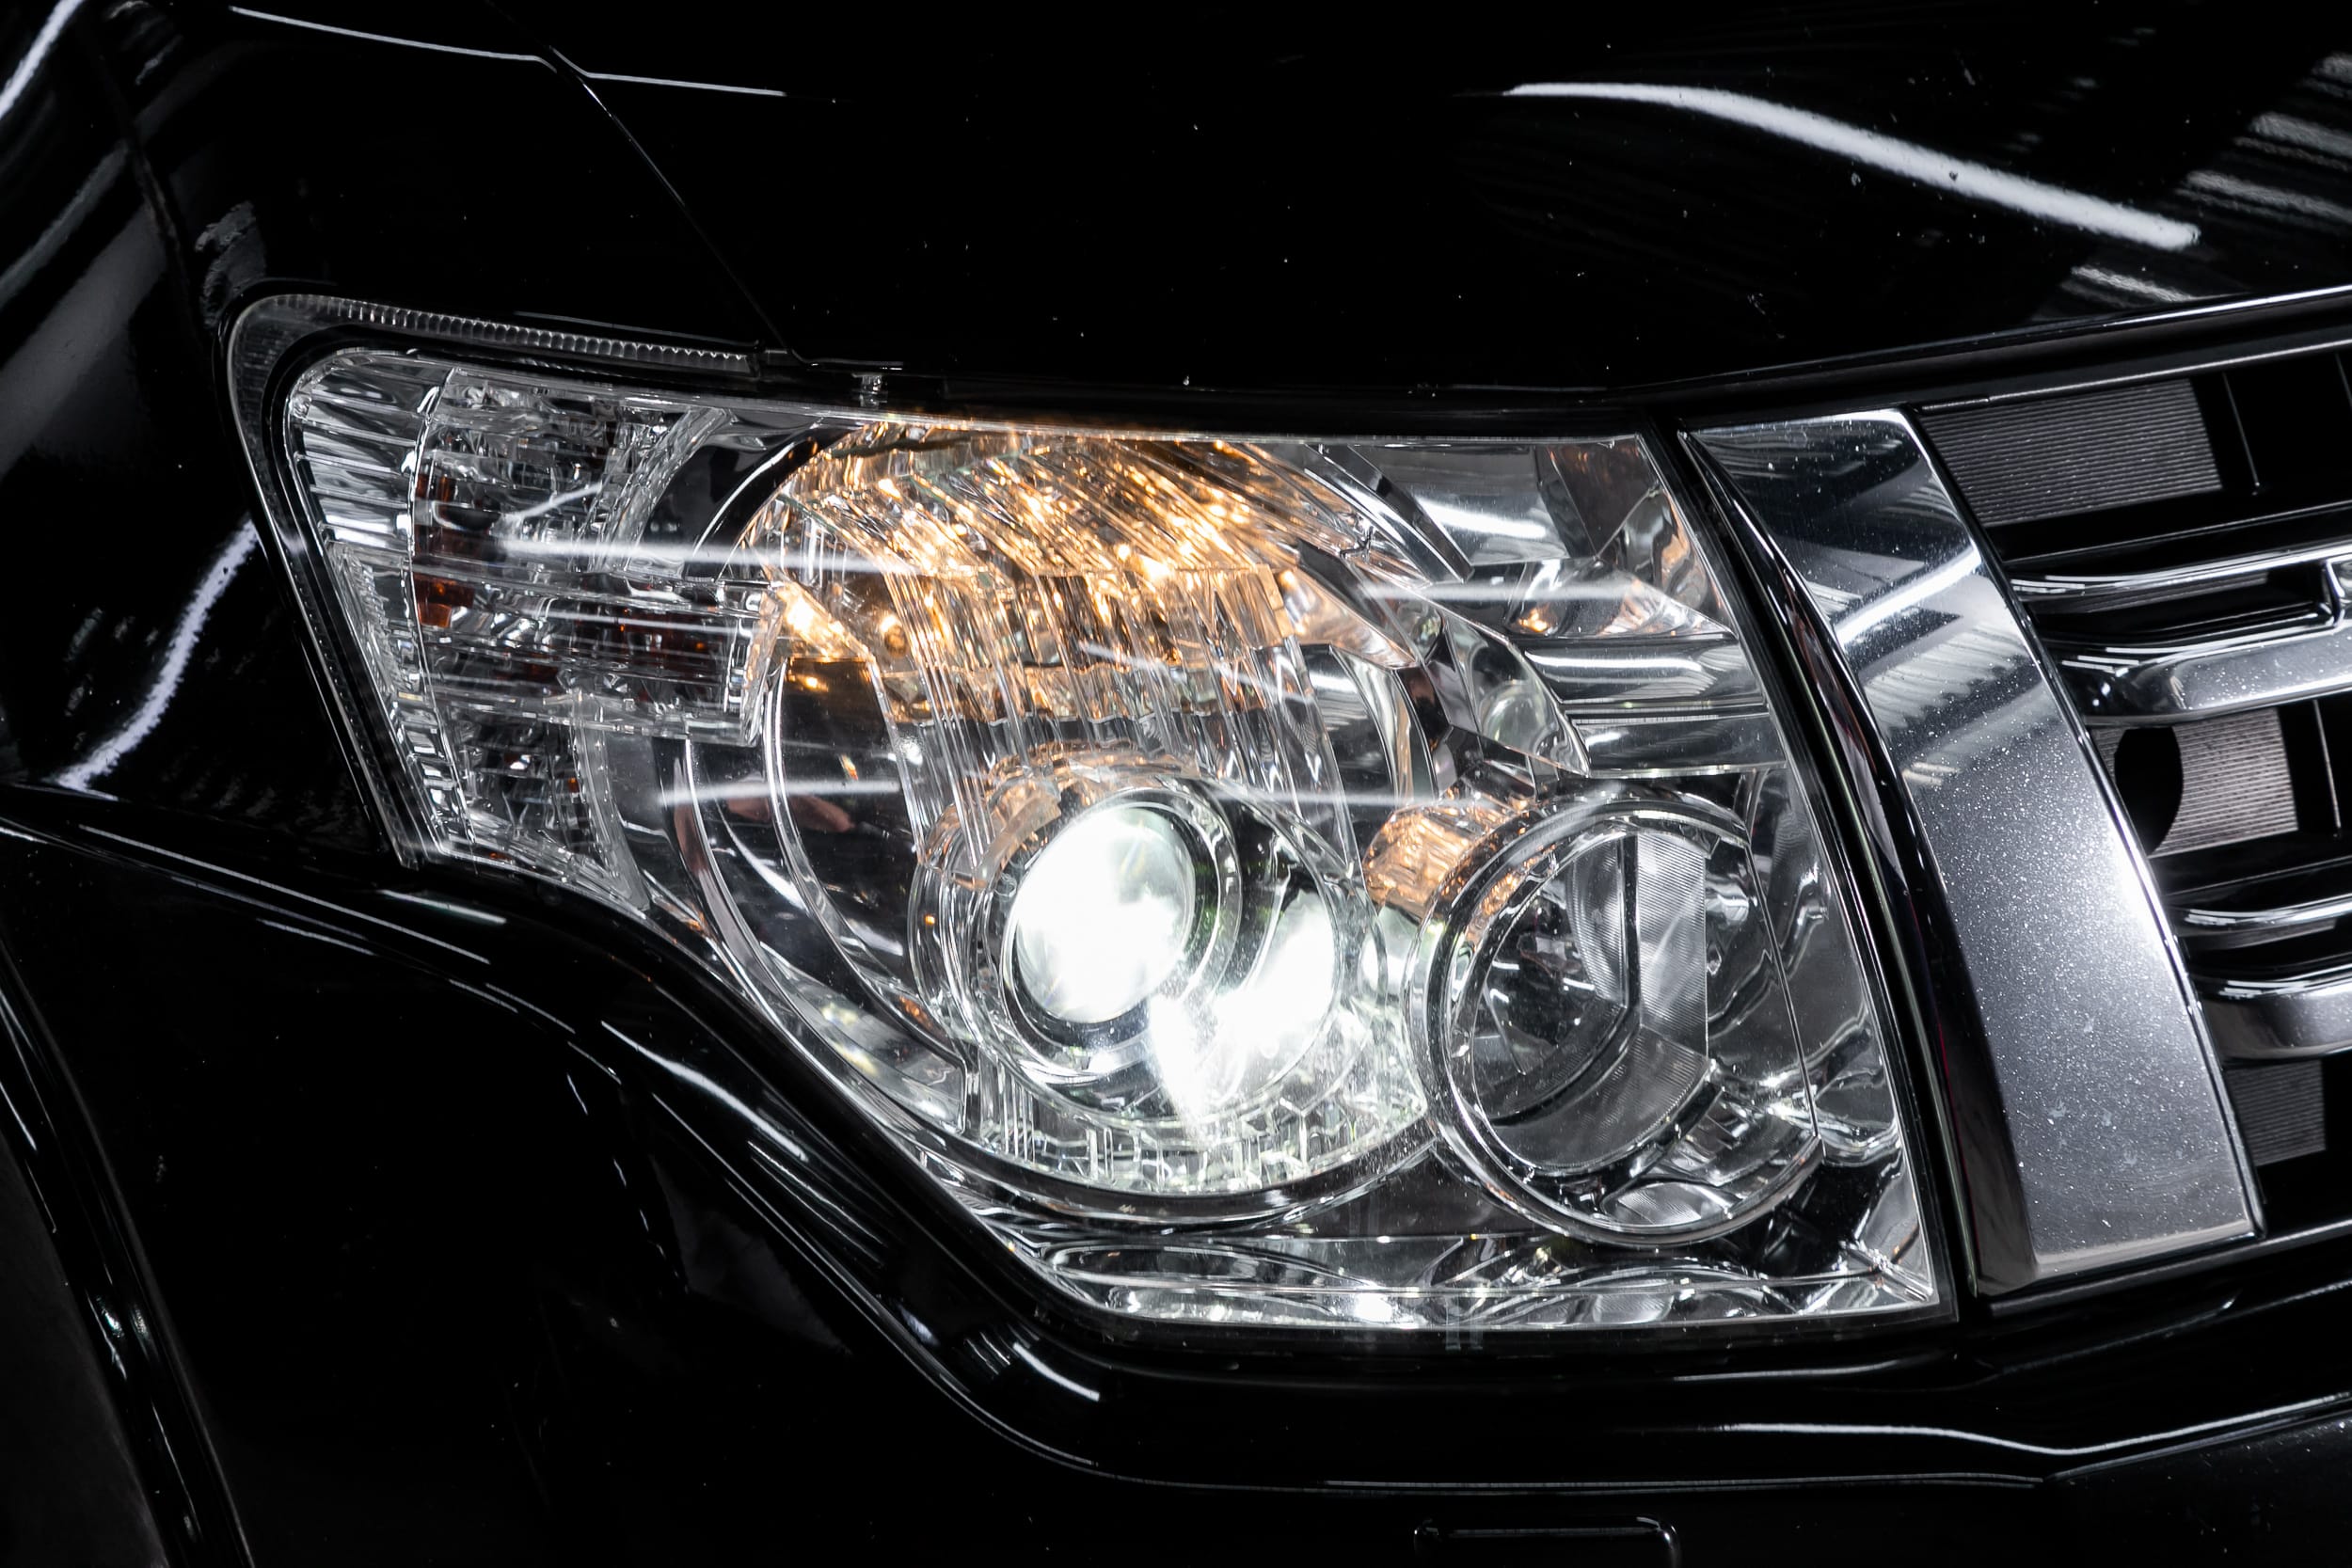 Headlight Restoration as an Alternative to Replacement